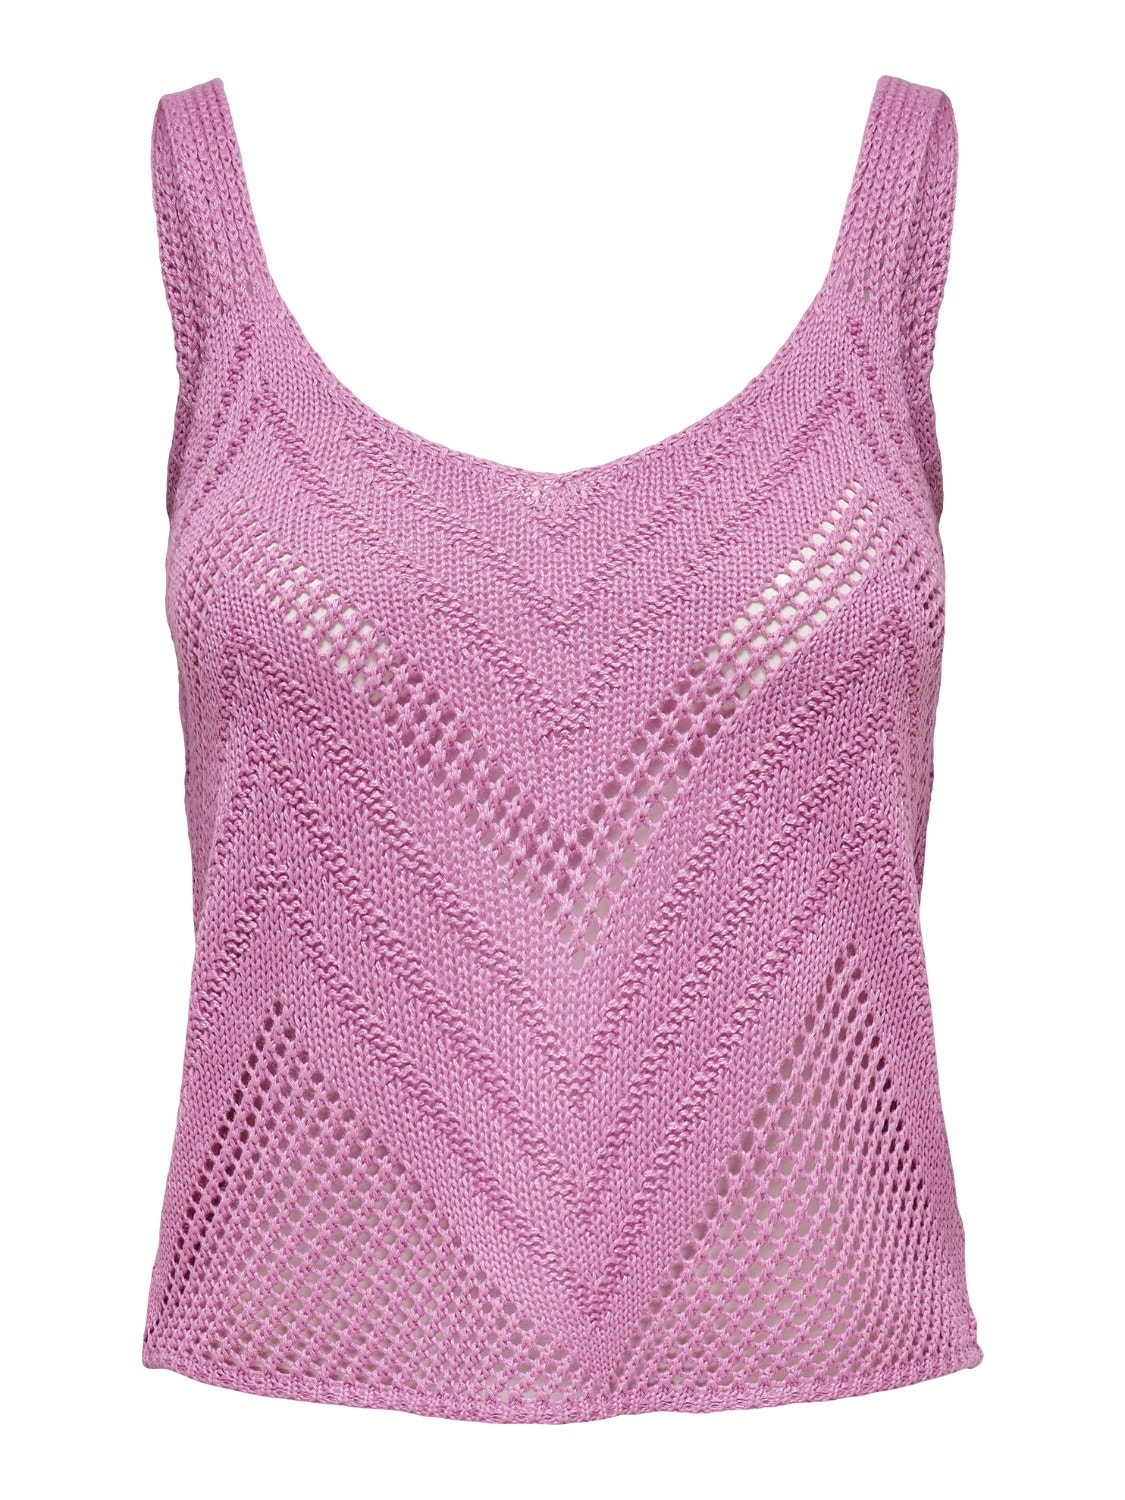 ONLY Textured Knitted Top -Fuchsia Pink - 15226348